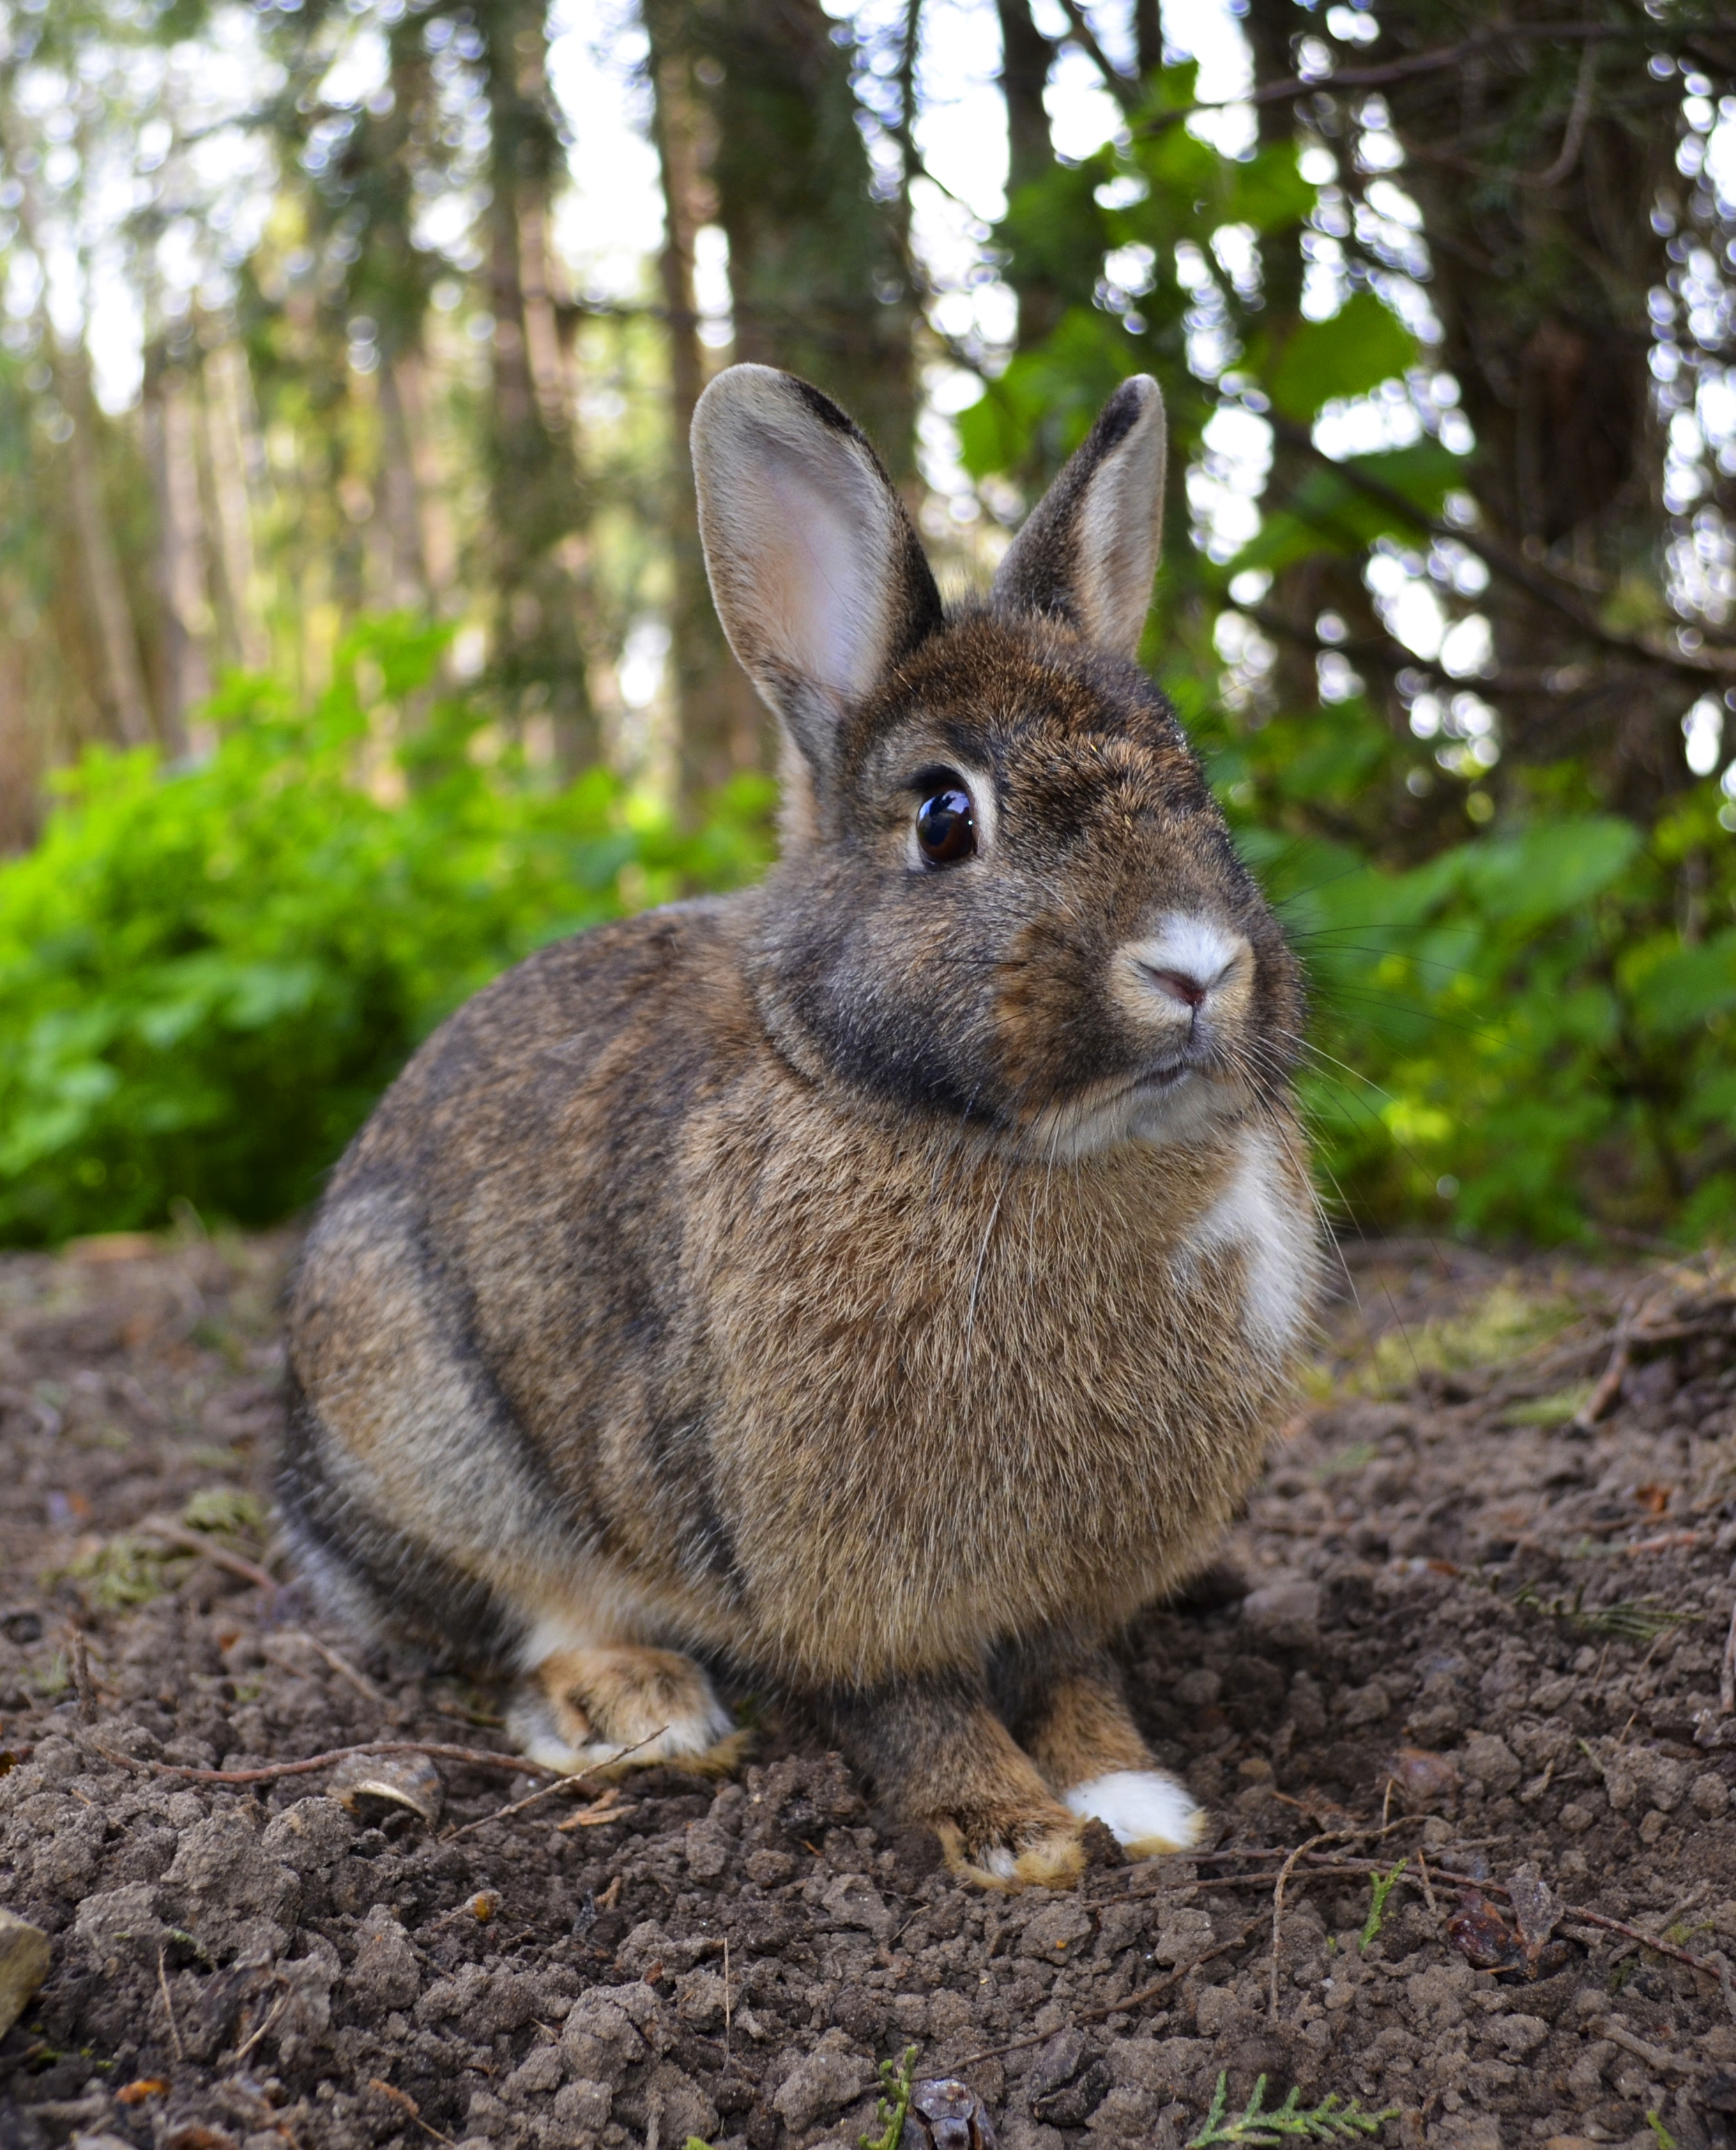 Why are rabbits classified as mammals?